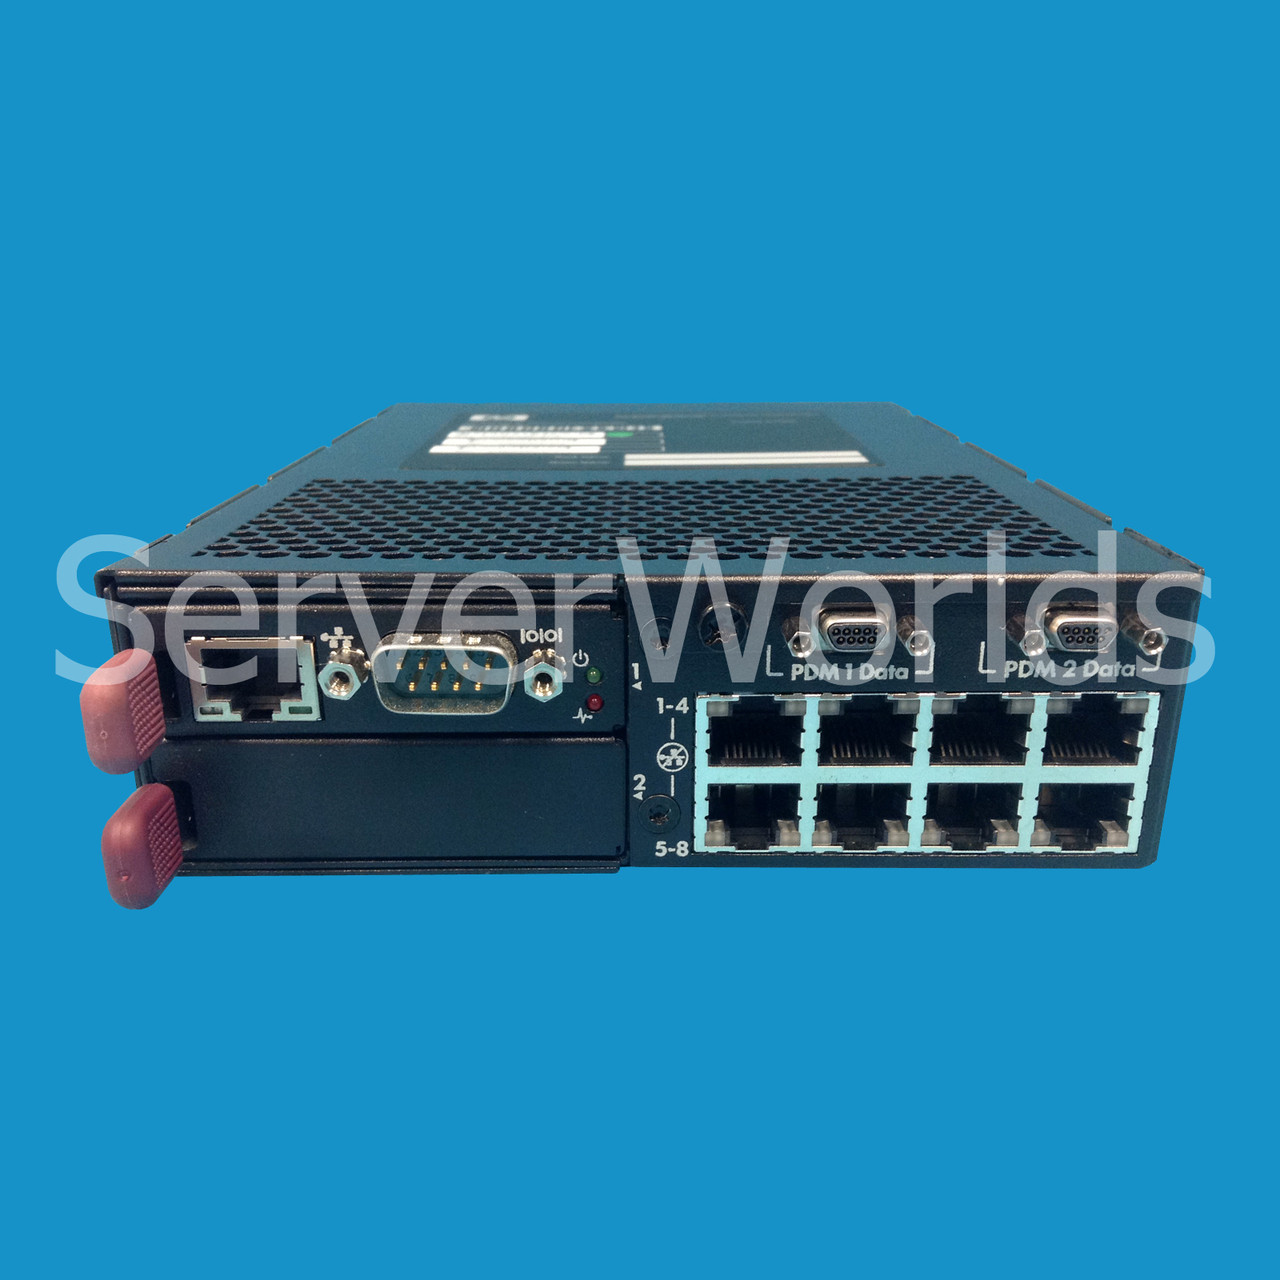 HP 590629-001 SL Advanced Power Manager Kit 572575-001